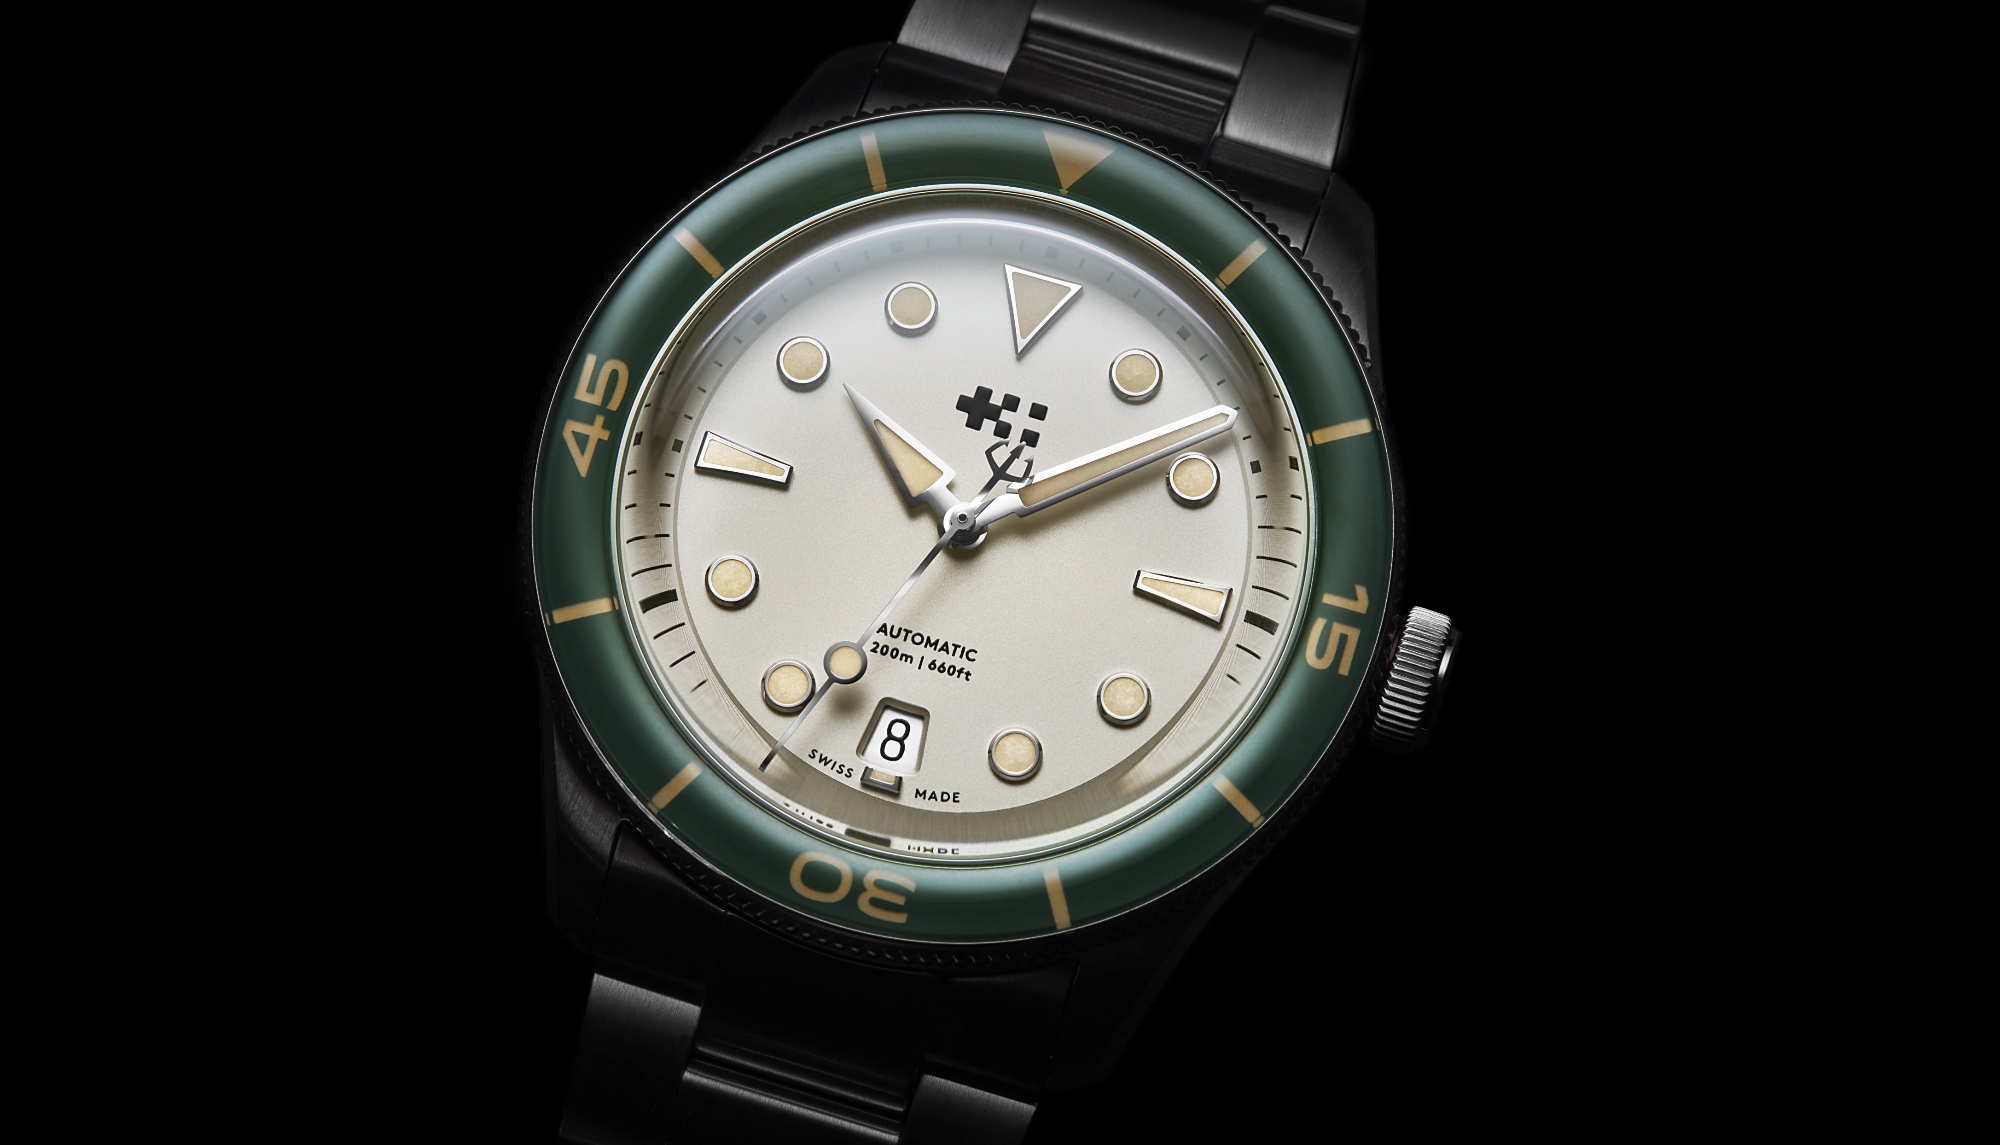 At Auction: A Christopher Ward C65 Trident Diver watch, featuring